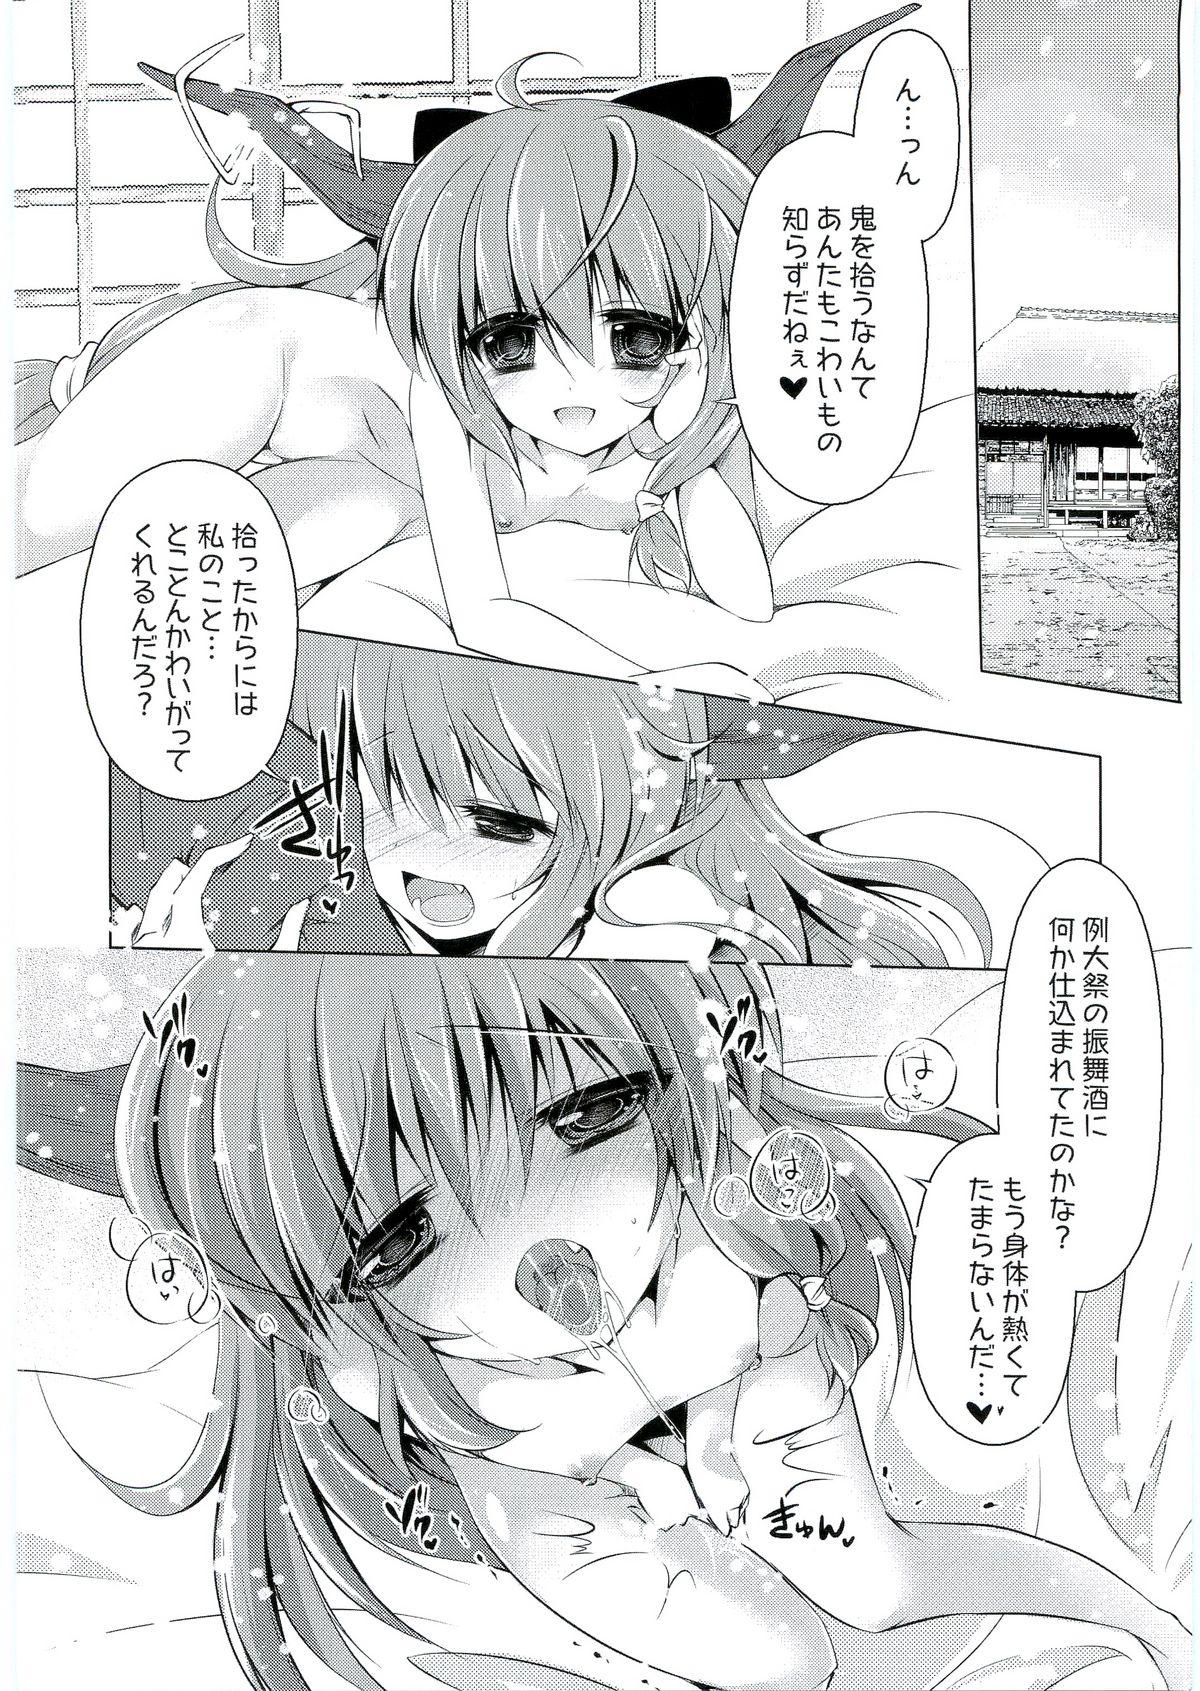 Oral Sex Suikachan Hirotta. - Touhou project Jerking Off - Page 3